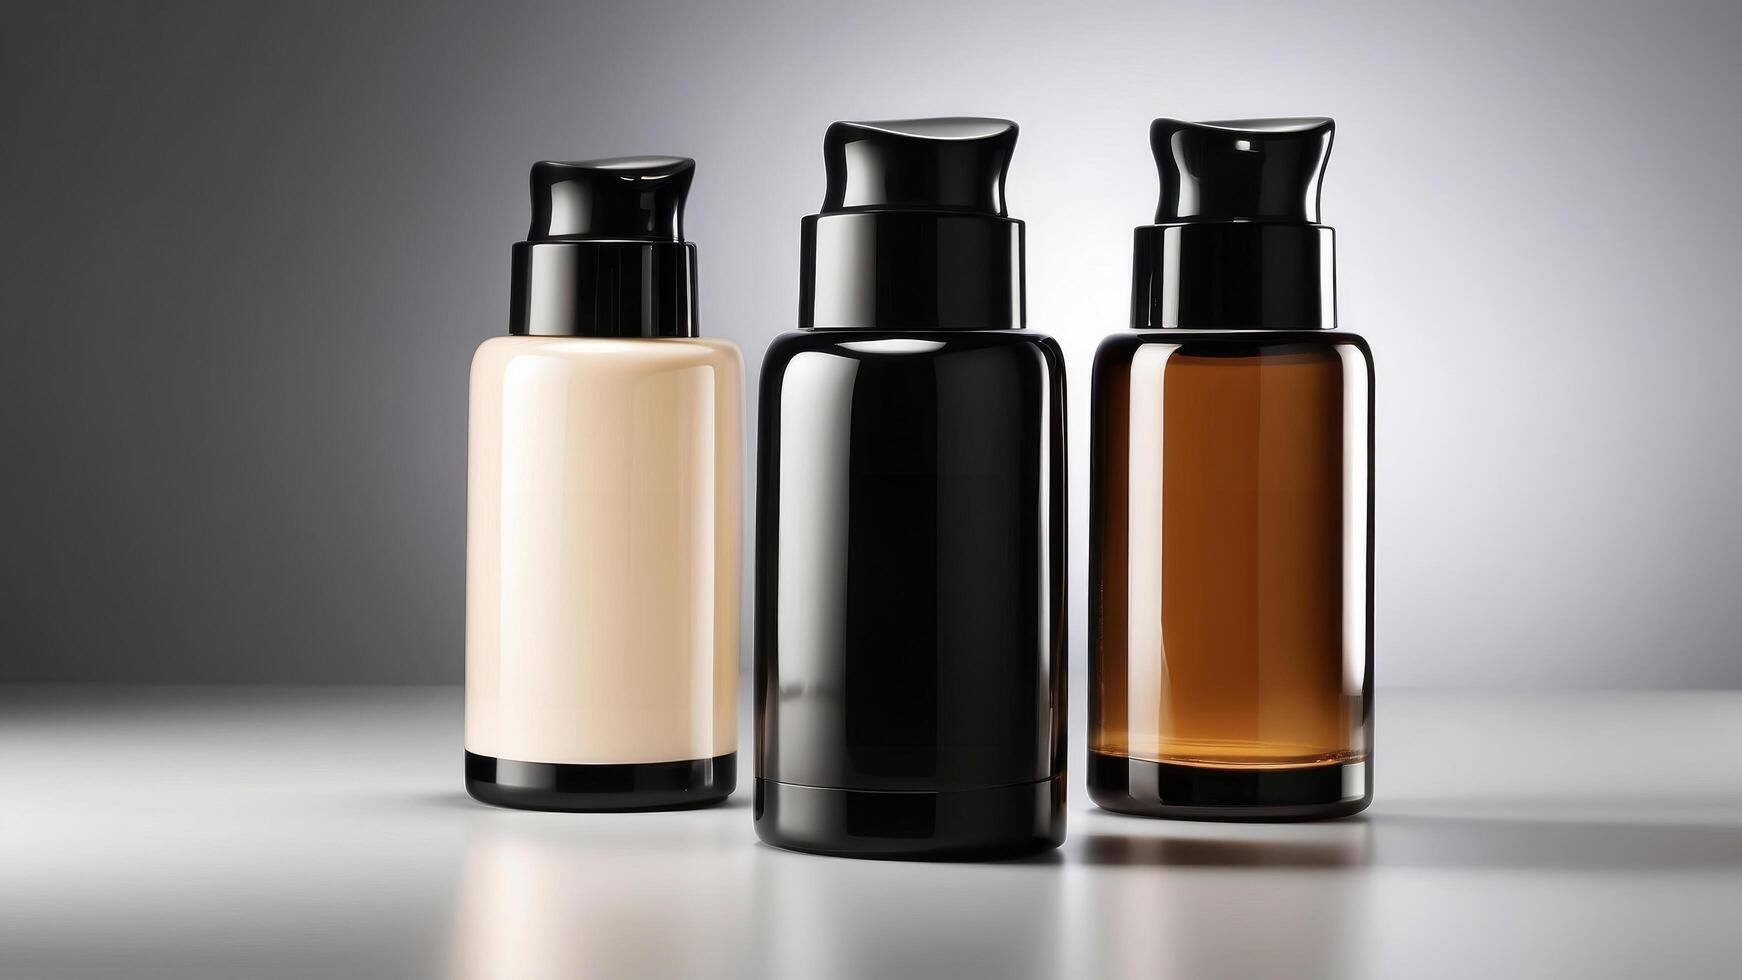 Luxury Trio of Foundation Pump Bottles in Beige, Black, and Amber on a Glossy Surface photo